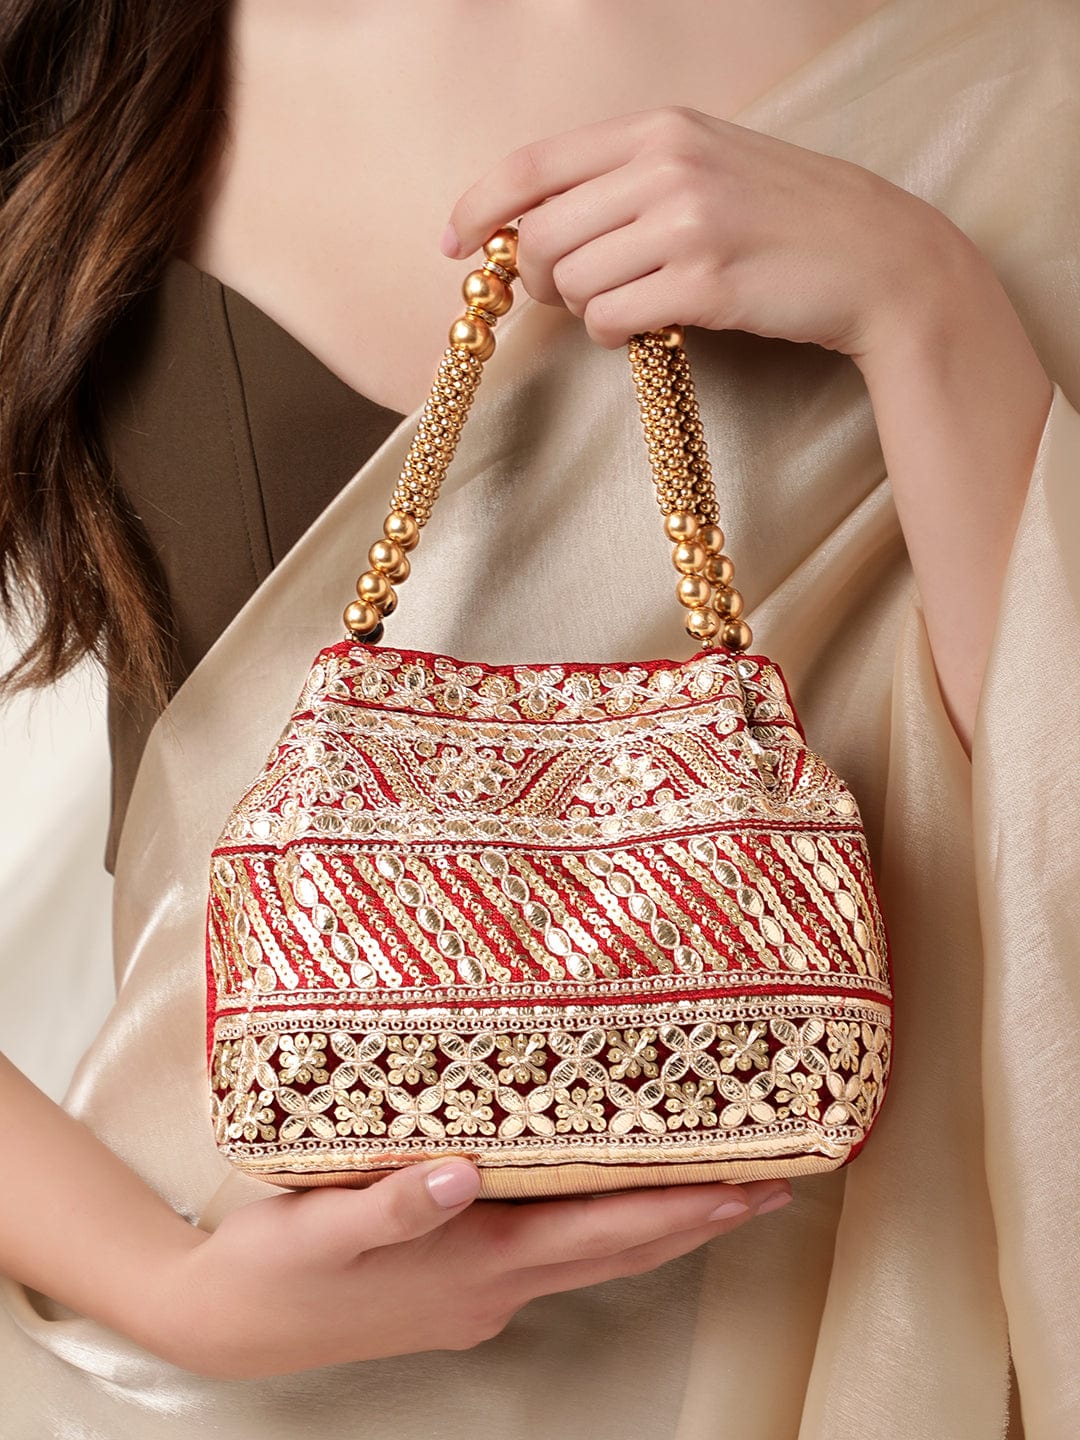 Small Vsling Handbag With Jewel Embroidery for Woman in Light